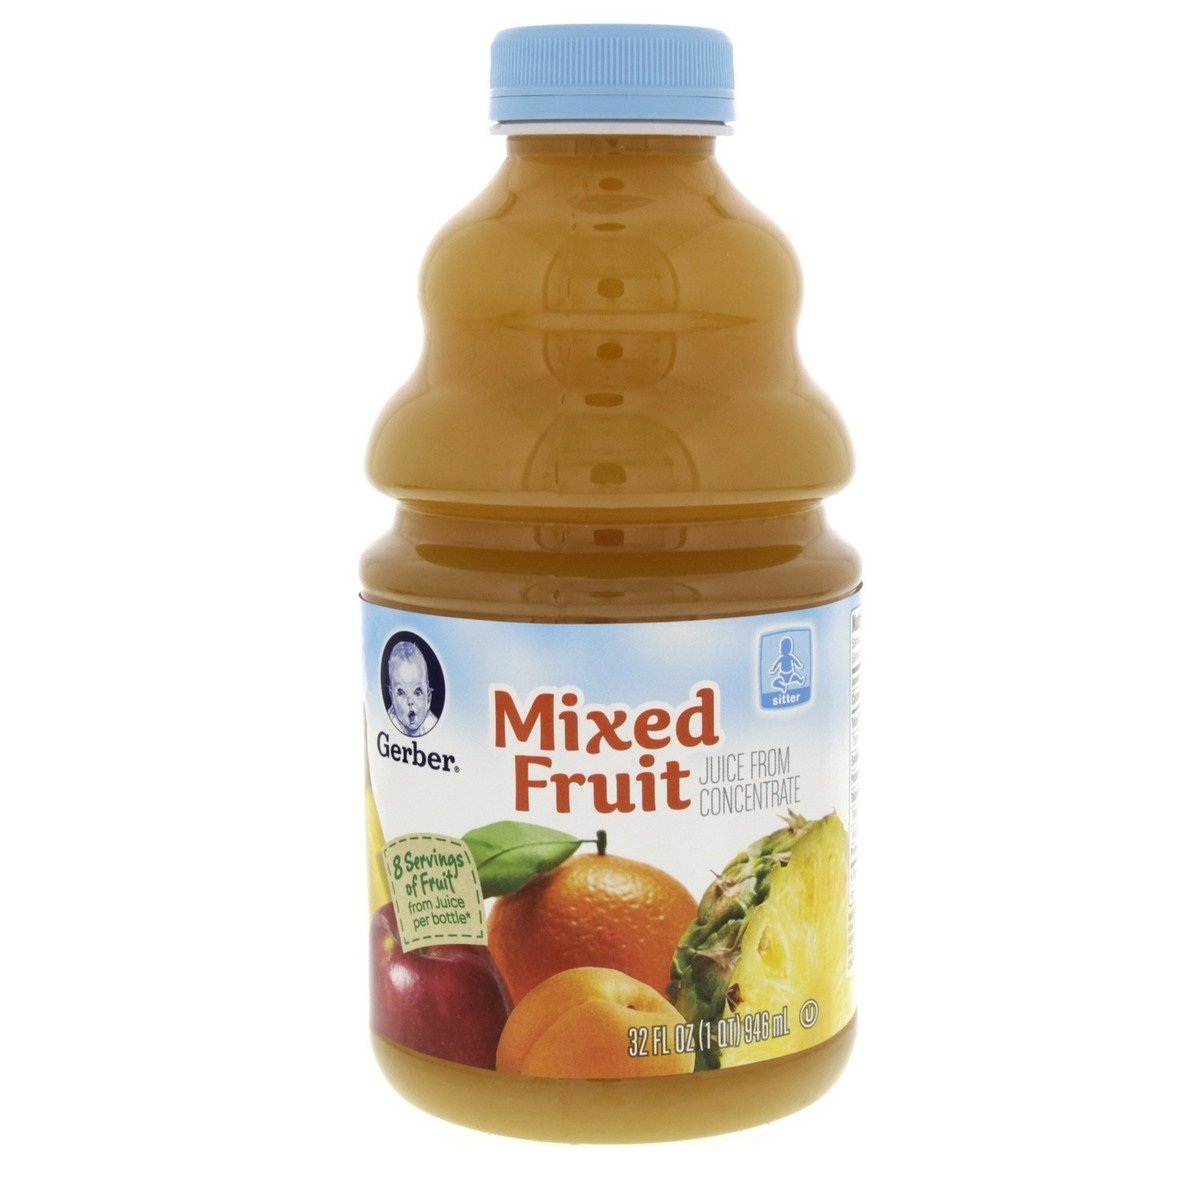 Gerber Mixed Fruit Juice From Concentrate 946 ml